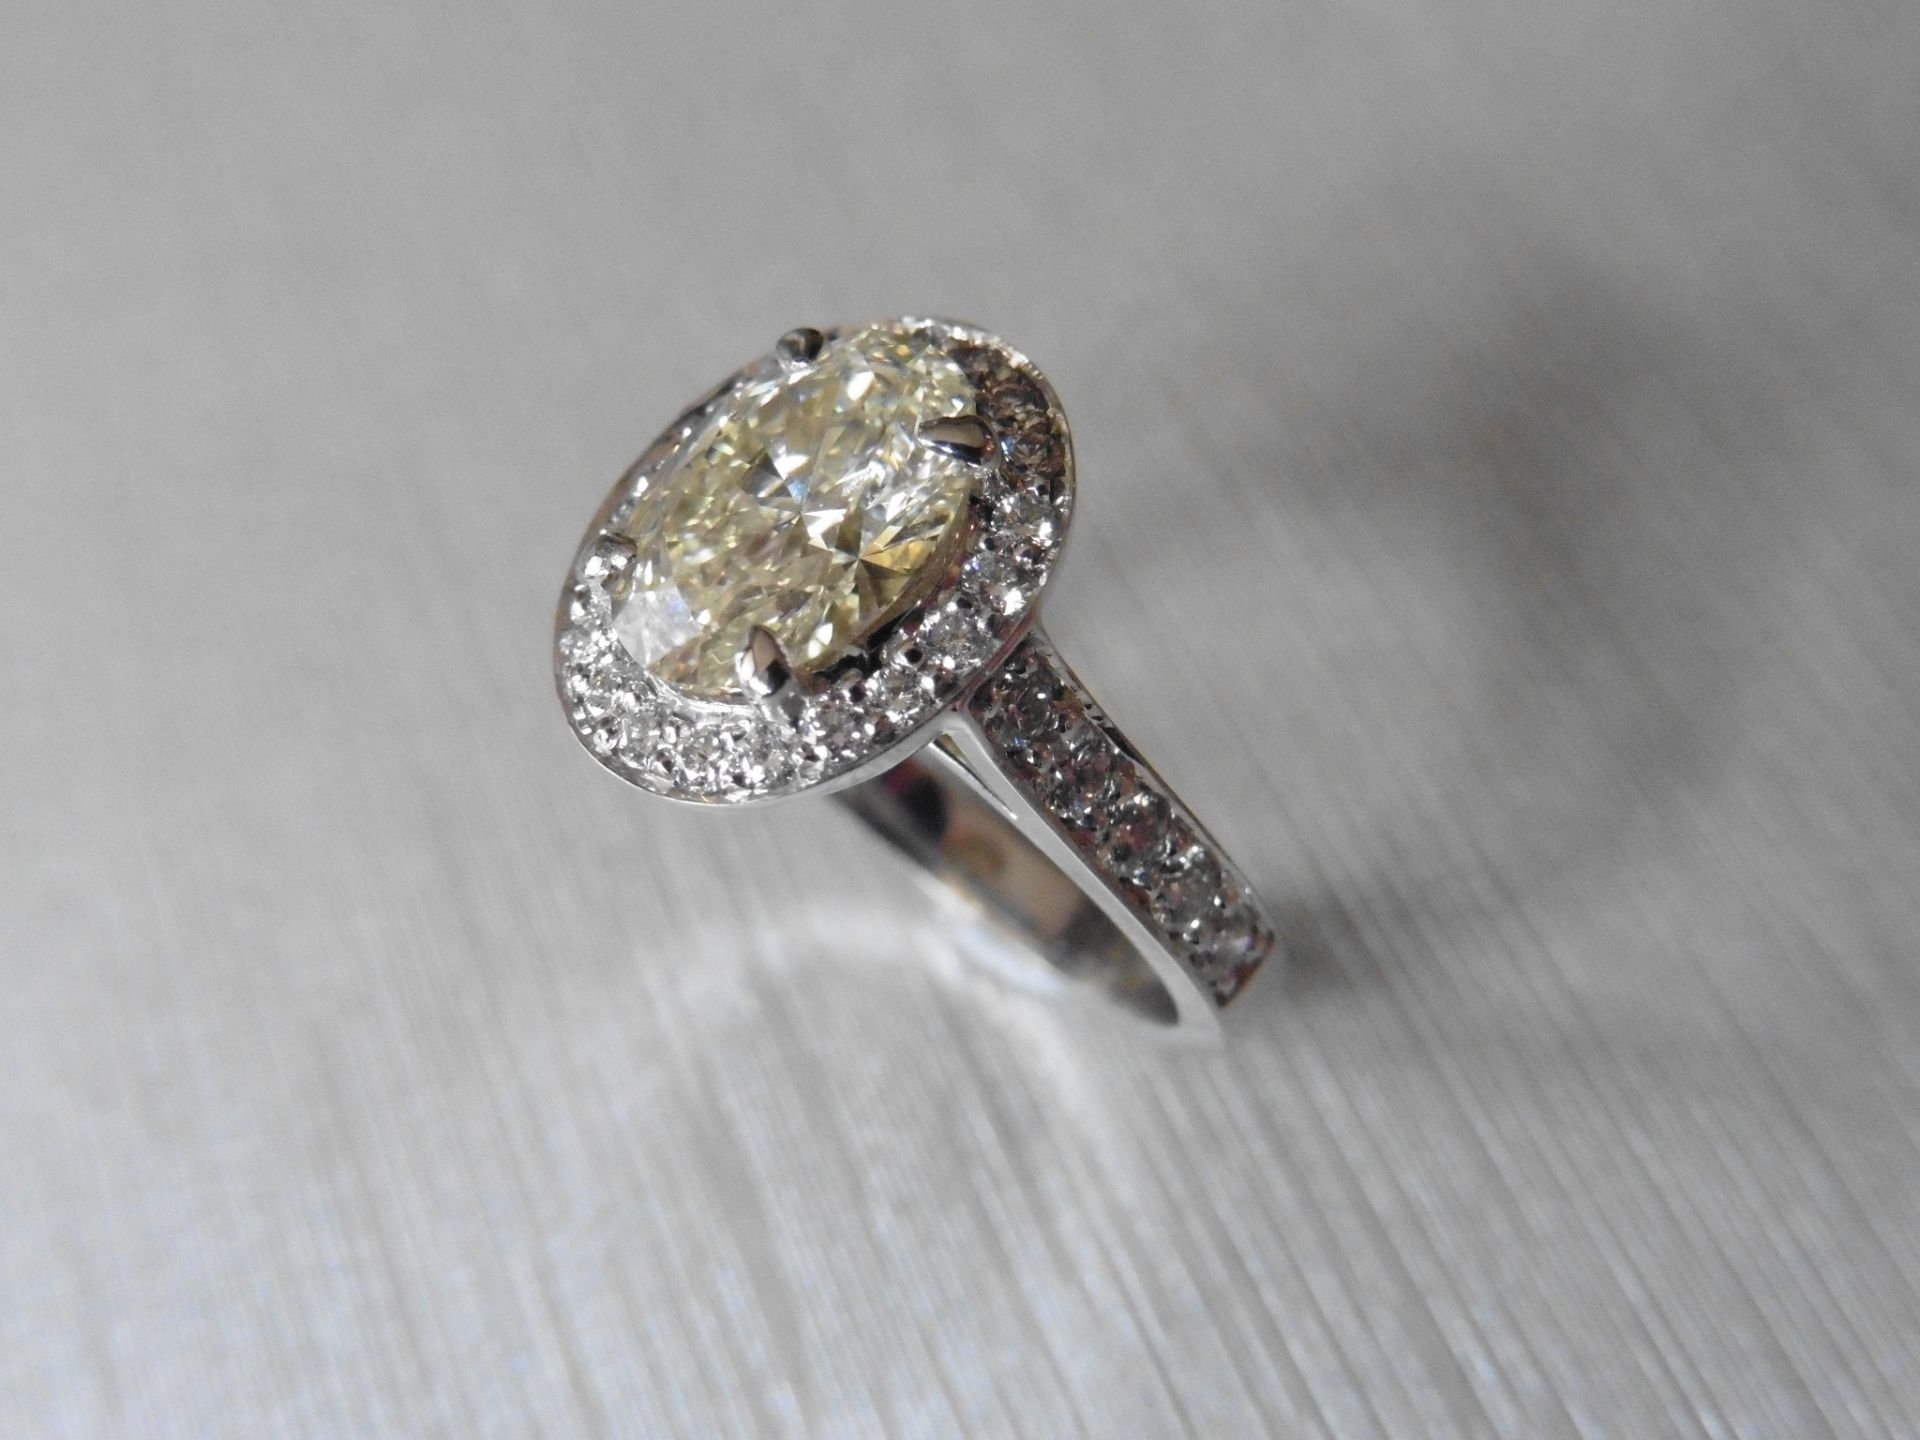 2.01ct diamond set solitaire ring. 2.01ct oval cut natural yellow diamond in the centre VS2 clarity. - Image 5 of 6